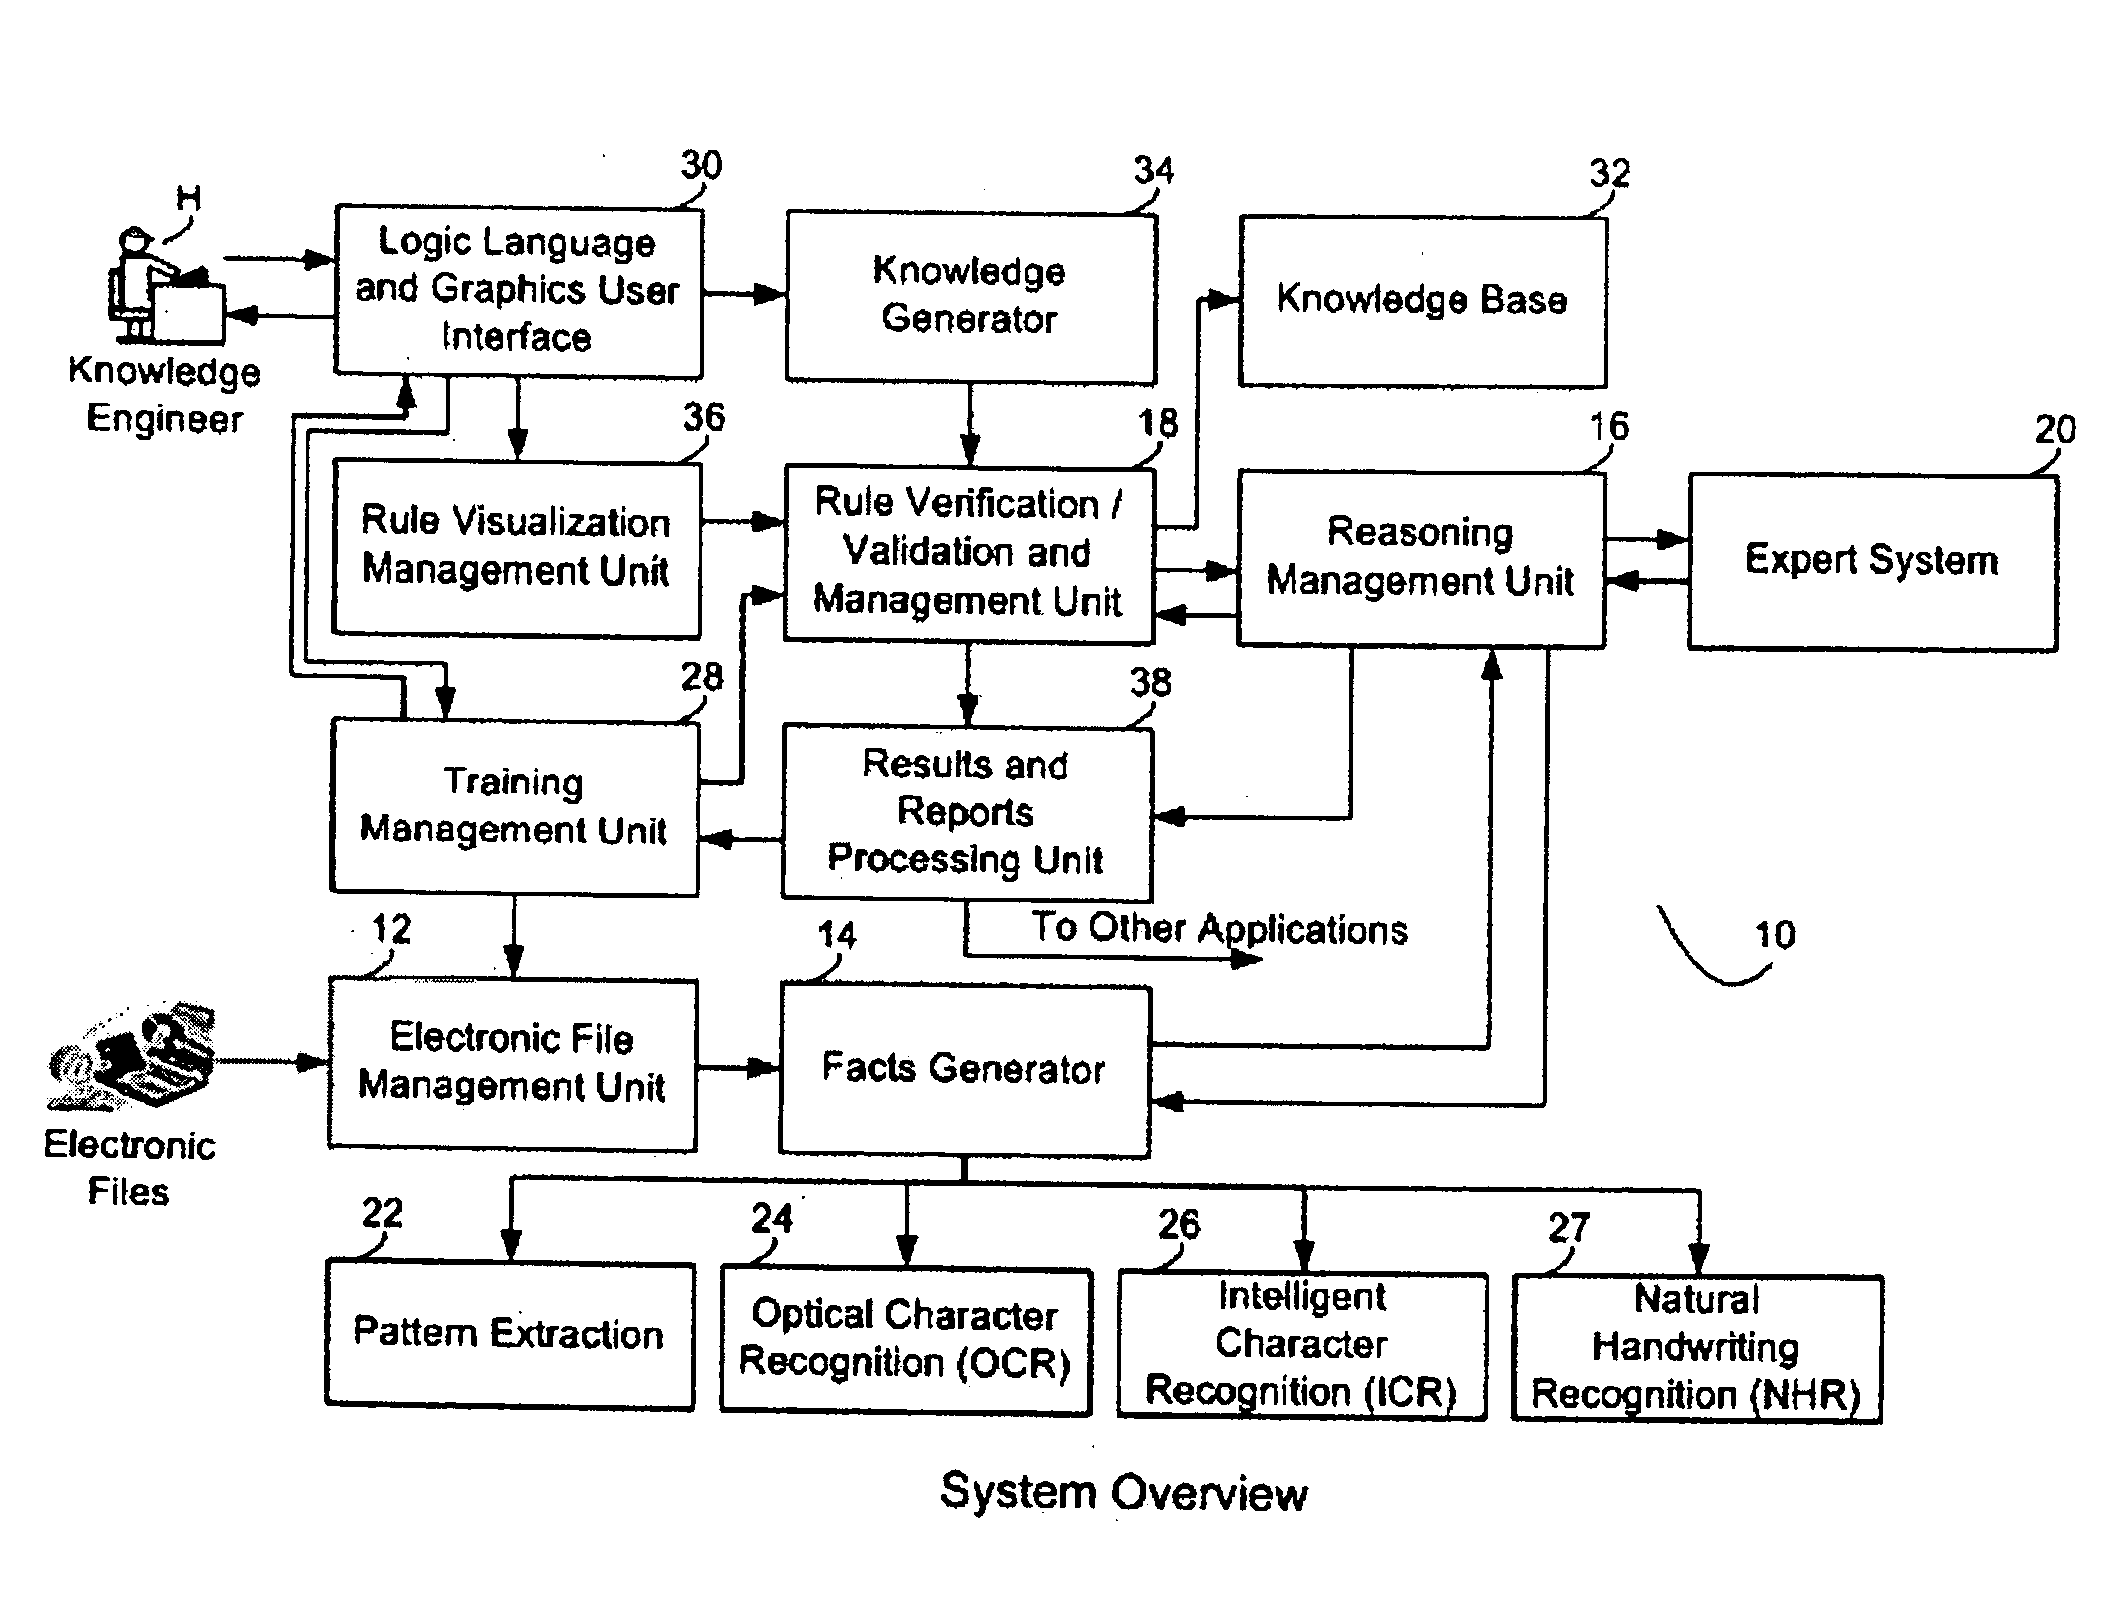 Automated system for understanding document content